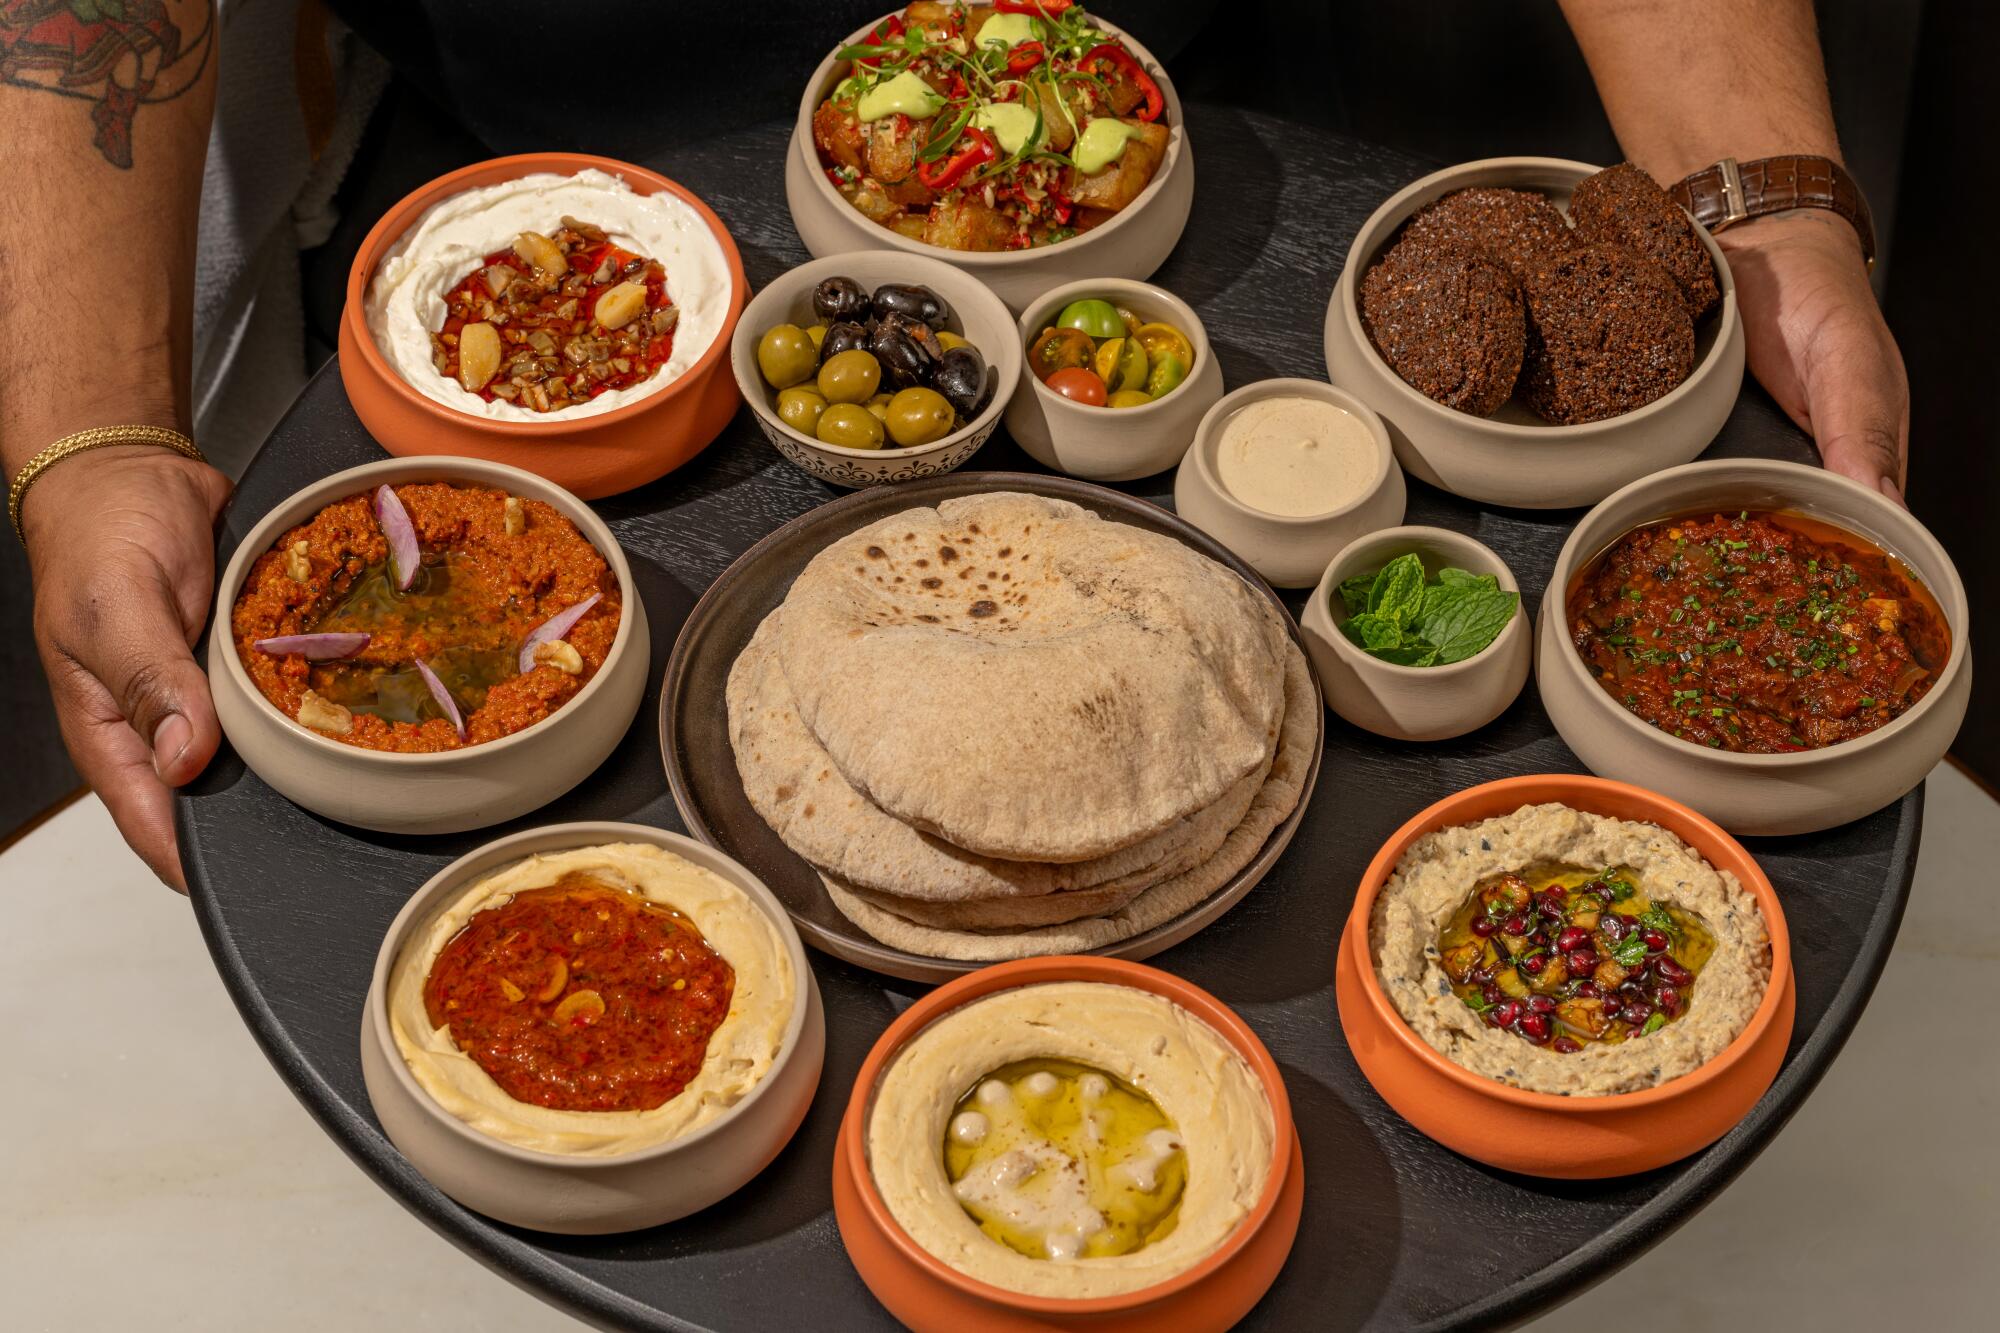 A person holding a large, round platter of round dishes containing an array of Lebanese food.